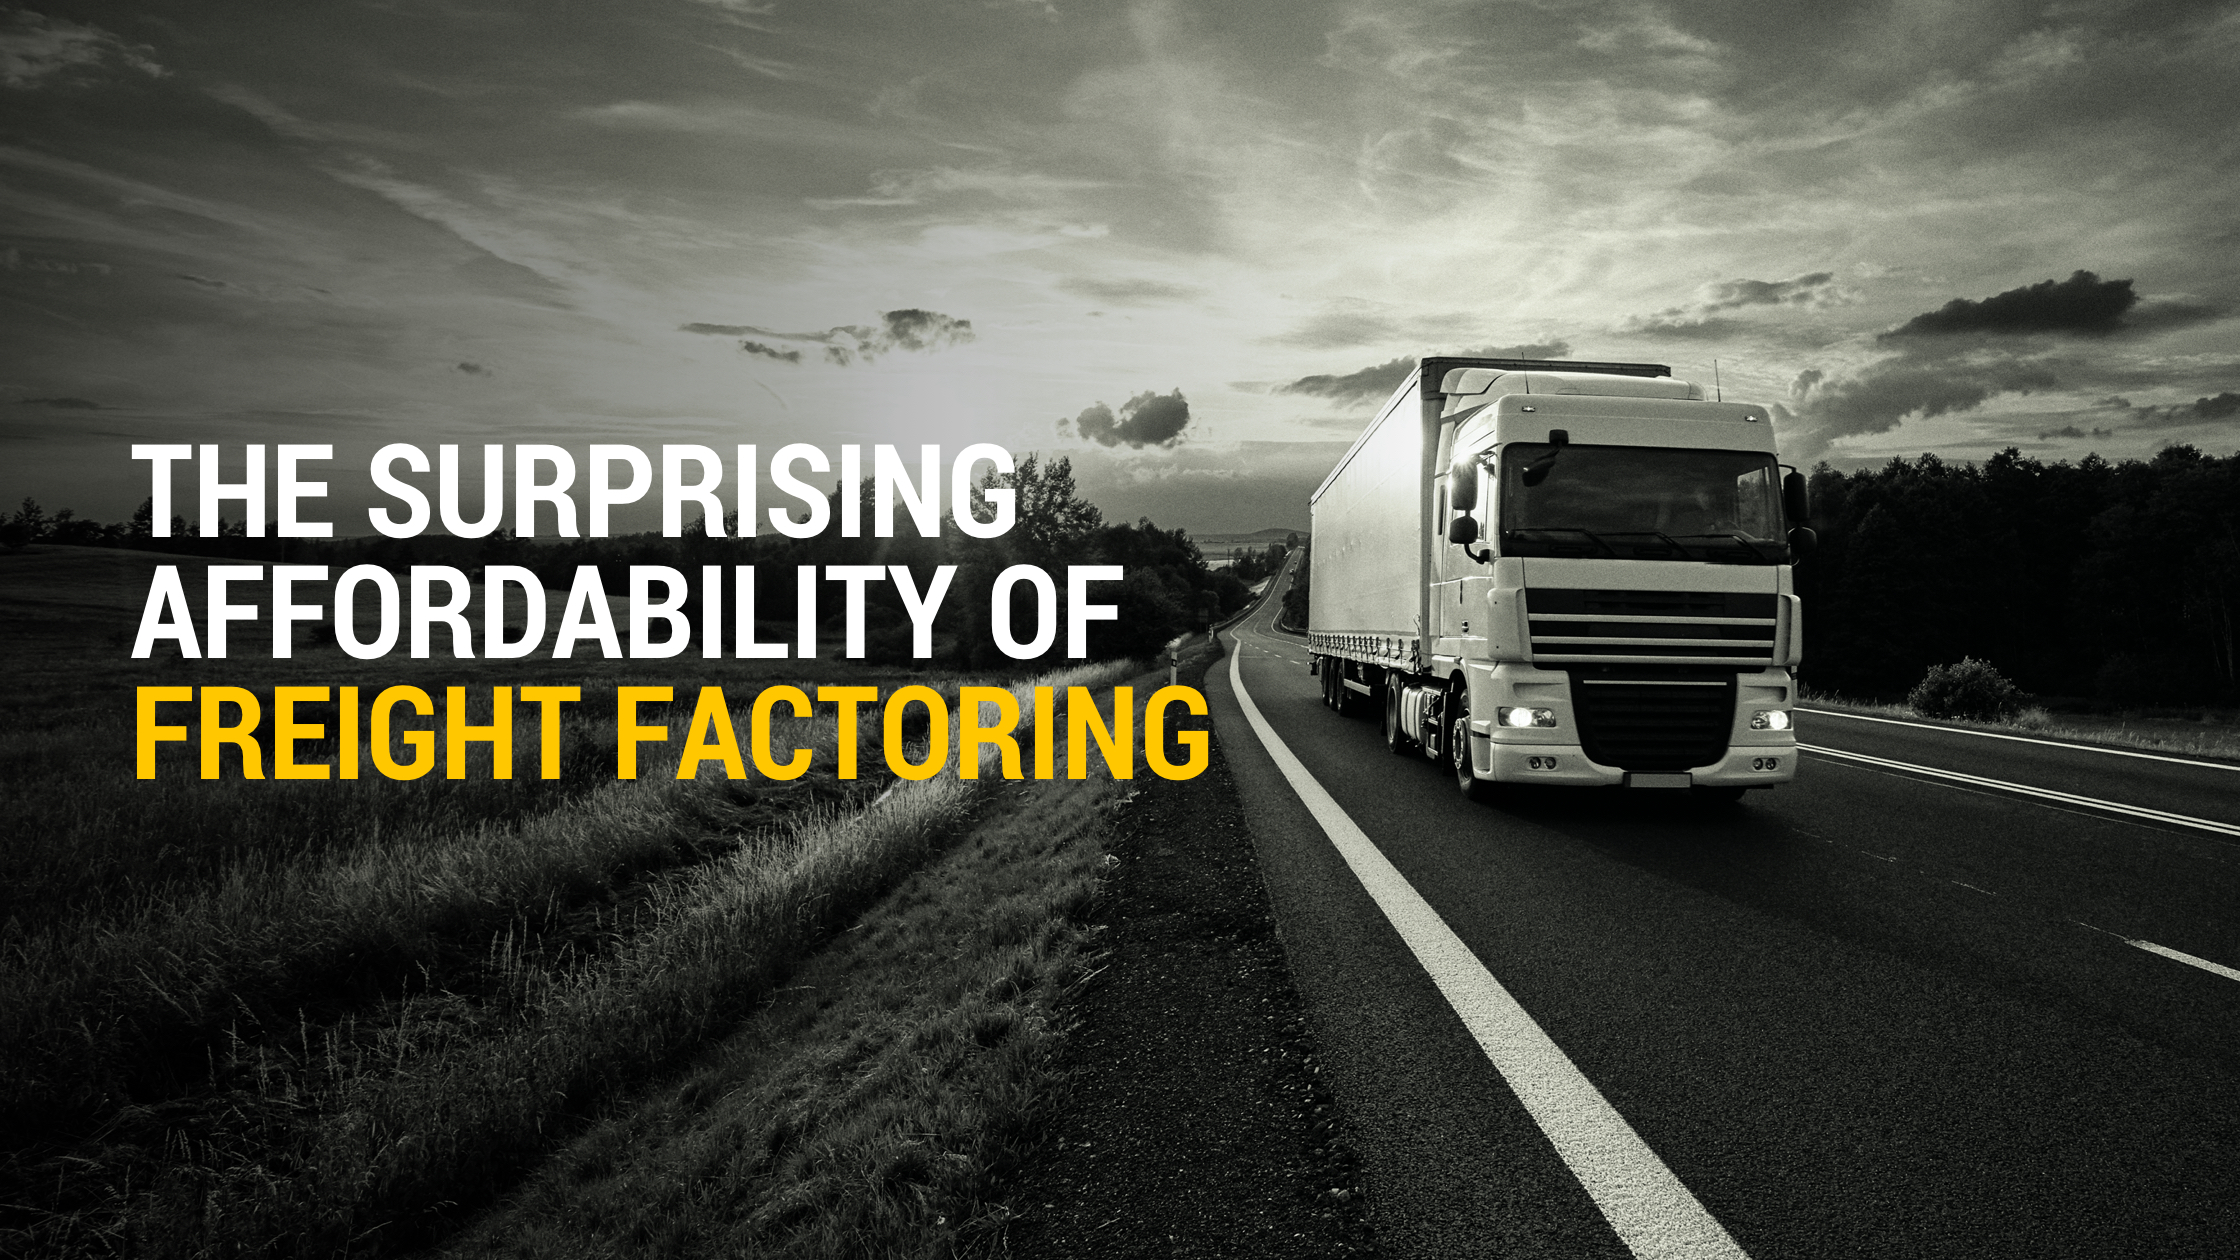 Surprising Affordability, Freight Factoring